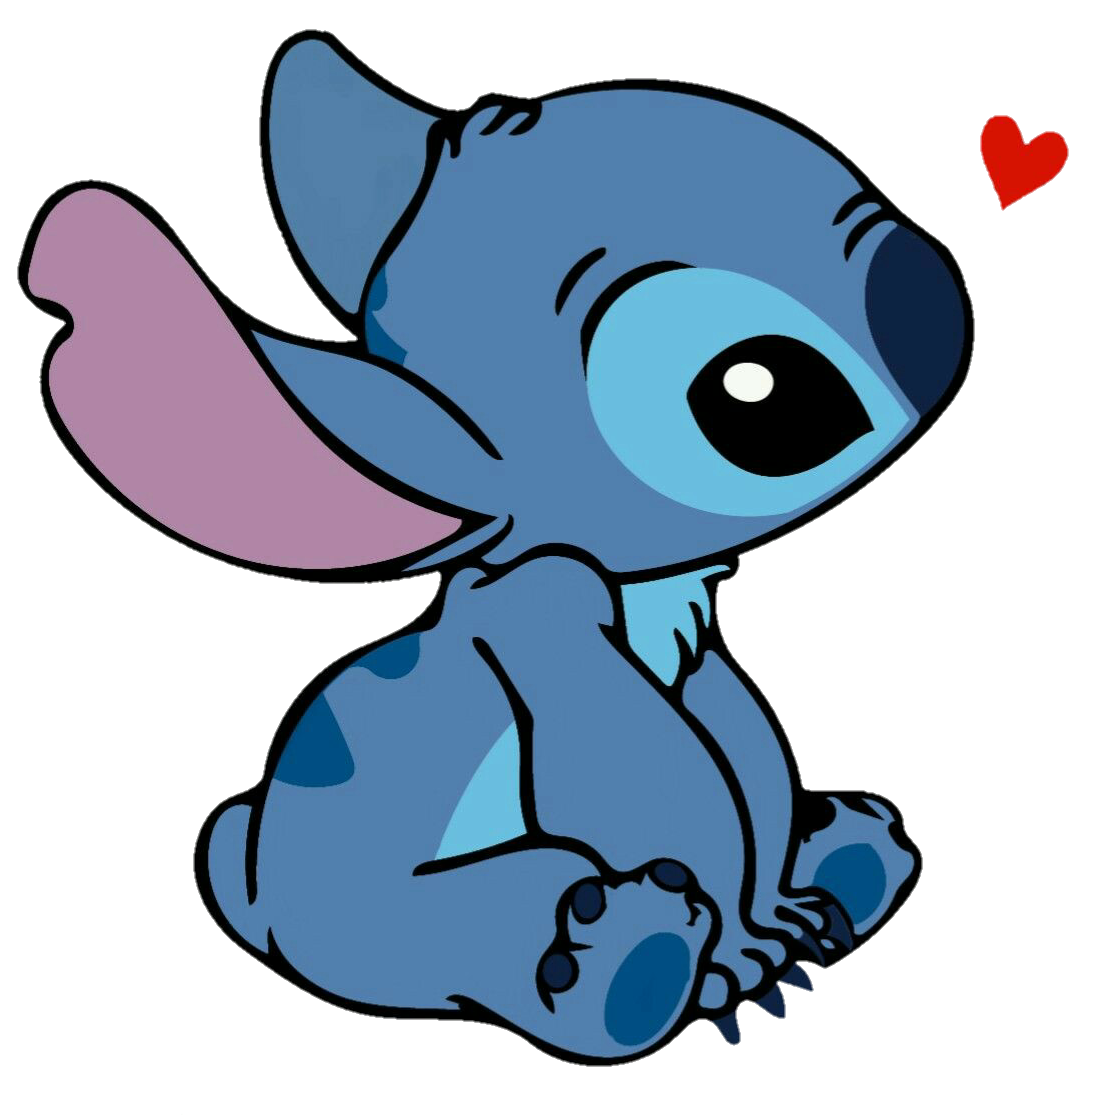 Download Cartoon Lilo And Stitch Vector SVG, PNG, EPS, DXF File